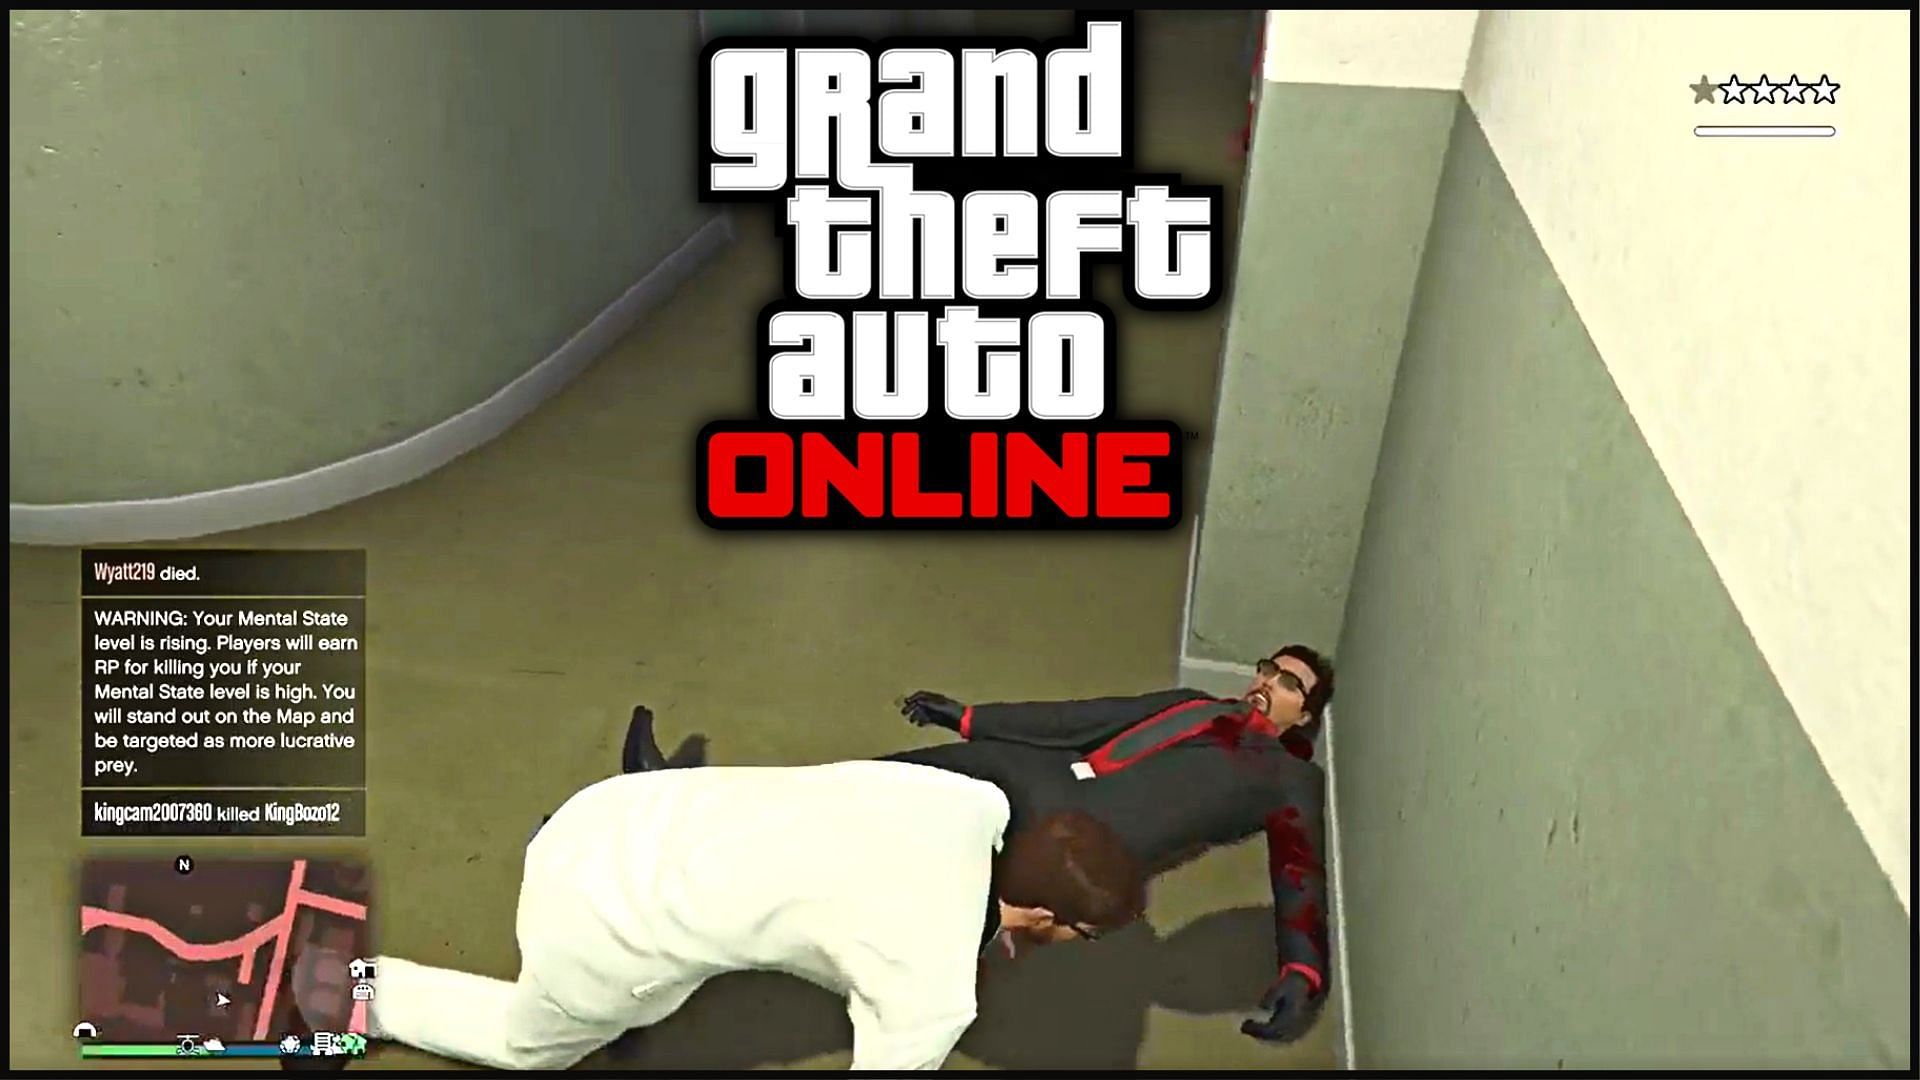 A screenshot of the GTA Online gameplay video where the player looks like tackling another player (Image via u/Kingcamgaming)